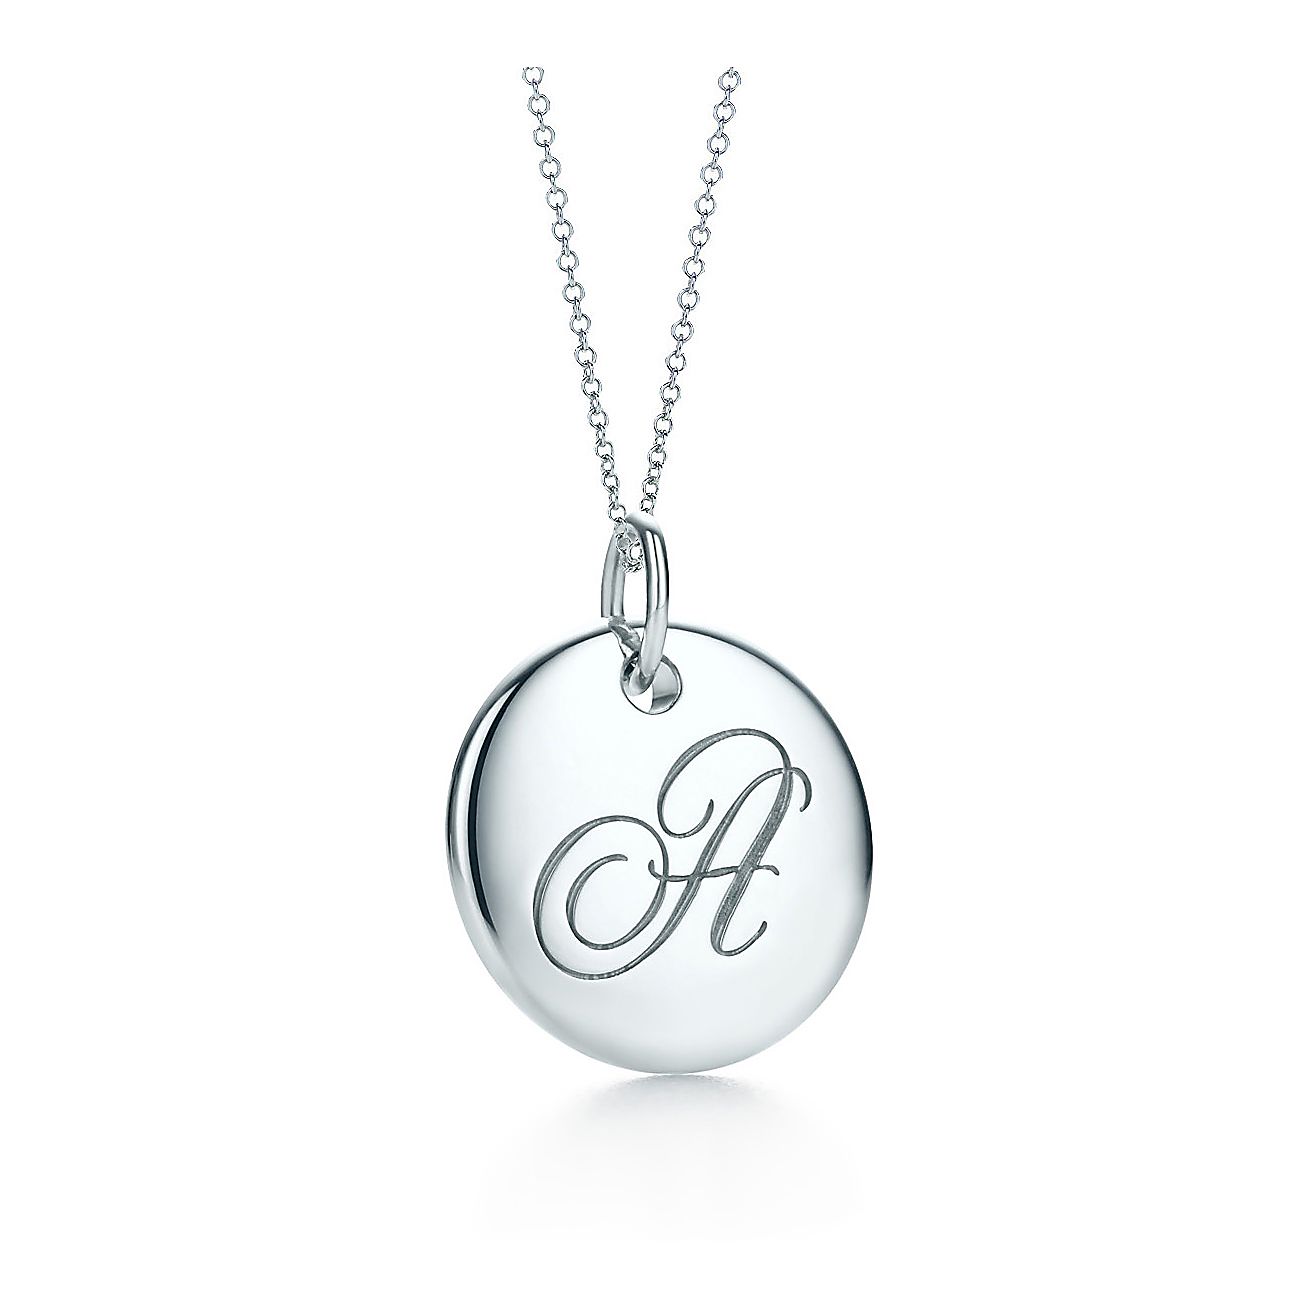 Tiffany Notes alphabet disc charm in silver on a chain. Letters A-Z available. | Tiffany & Co.